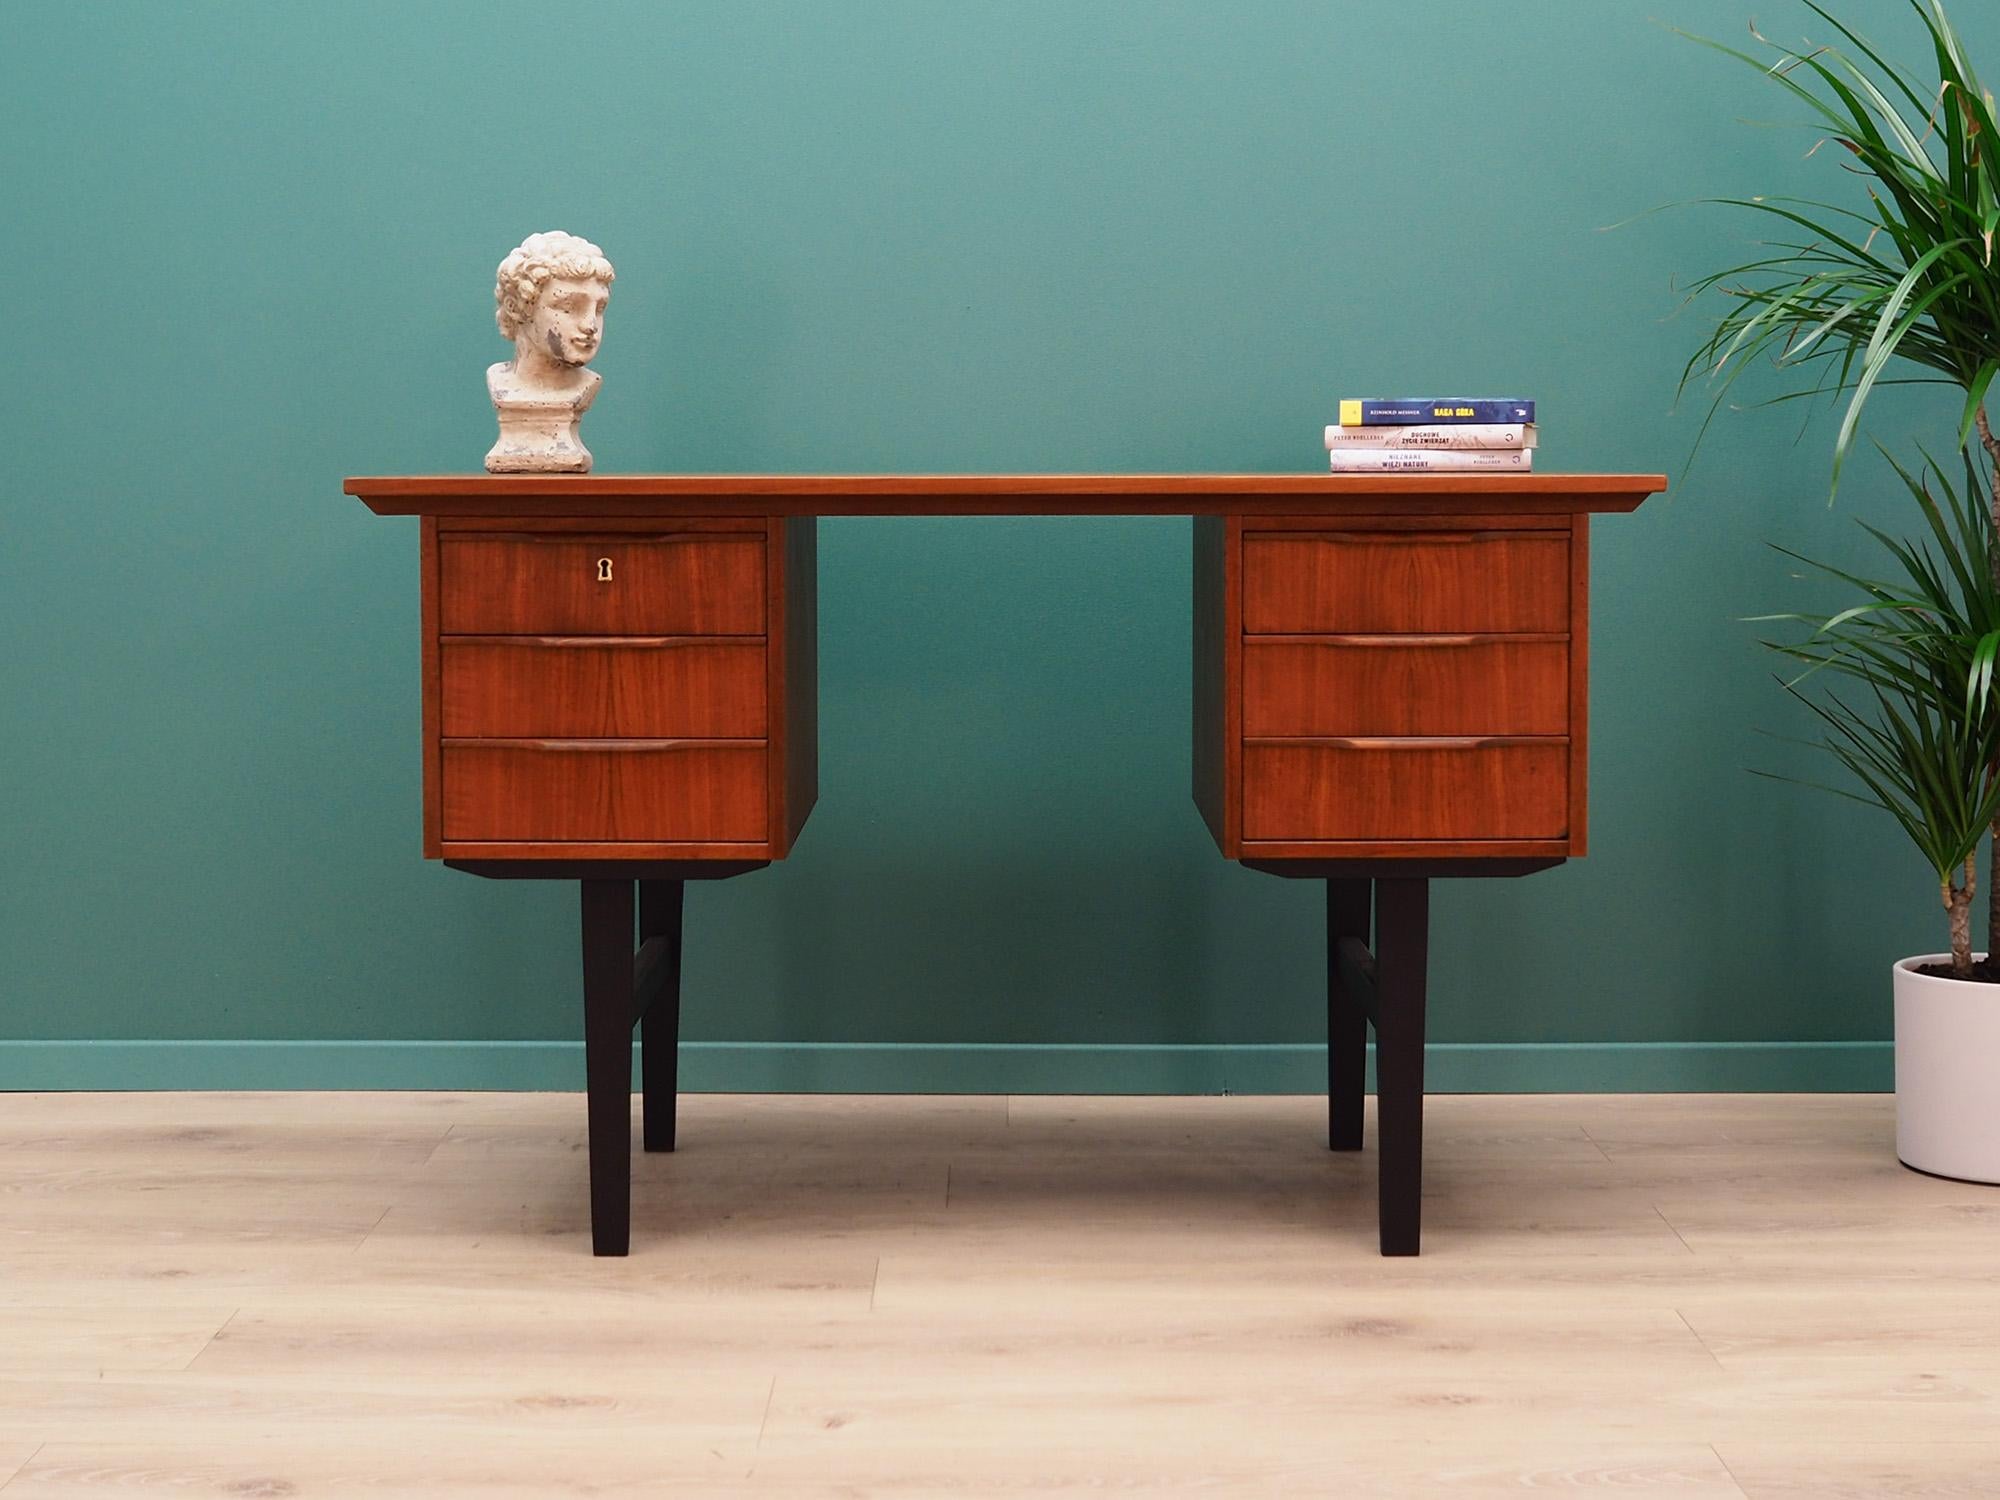 Classic desk from the 1960s-1970s. Danish design, Minimalist form. Furniture finished with teak veneer. Desk has six drawers, no key included. Preserved in good condition (minor bruises and scratches) - directly for use.

Dimensions: height 74.5